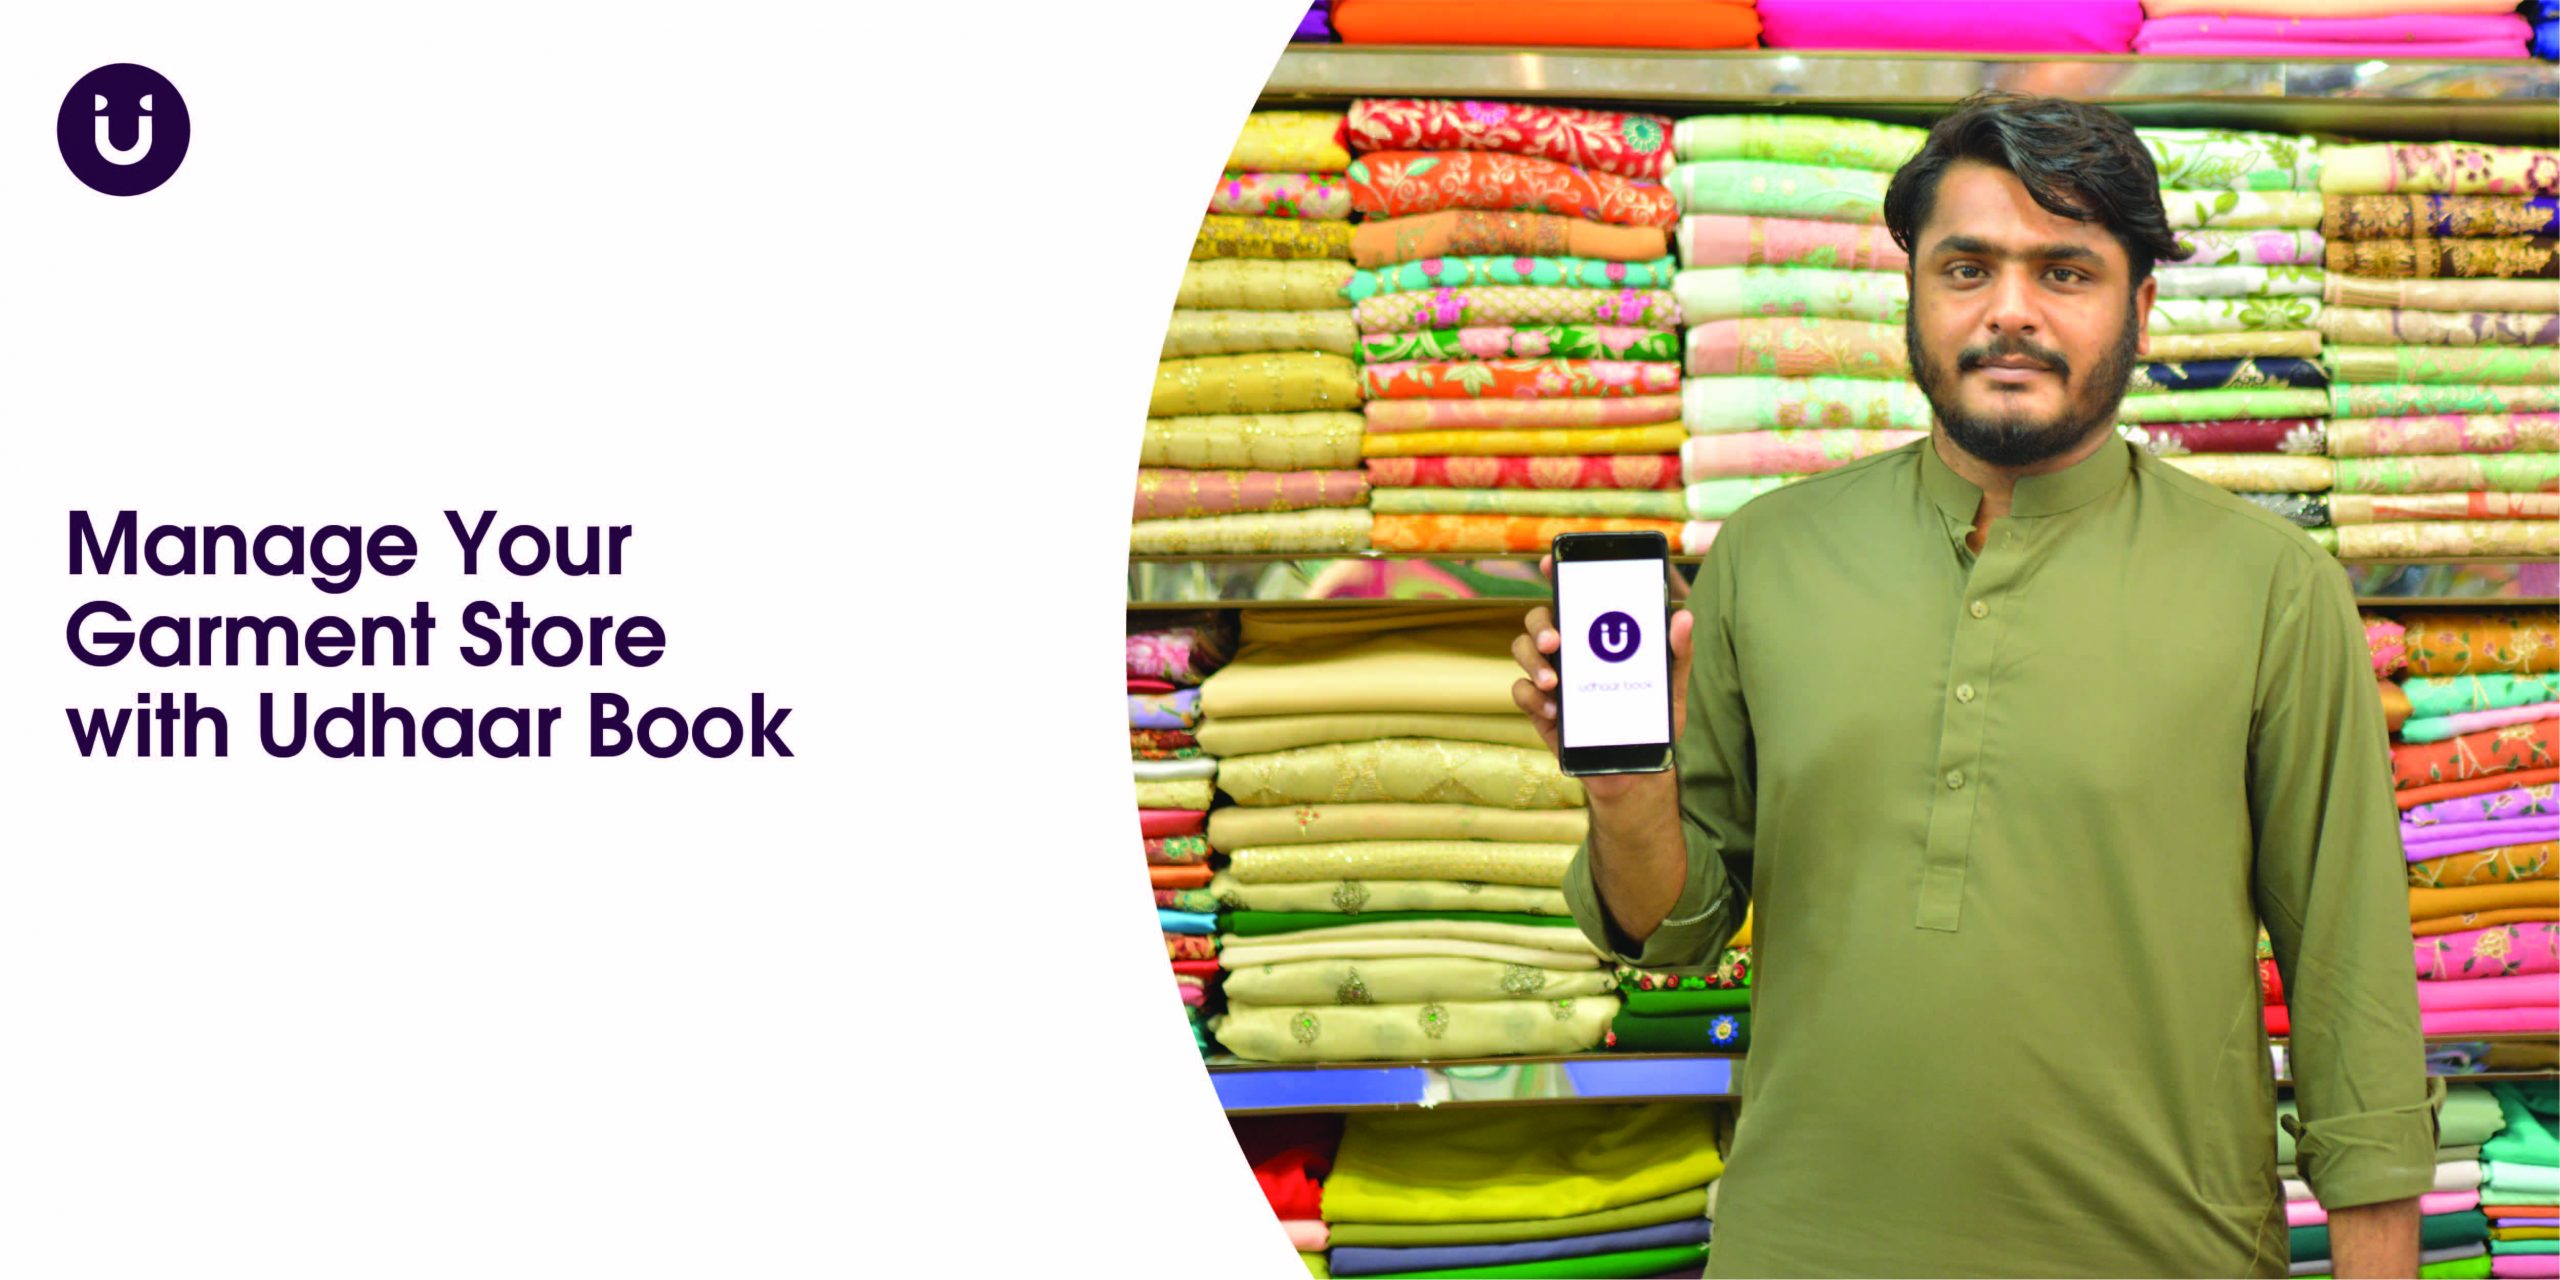 Manage Your Garment Store With Udhaar Book